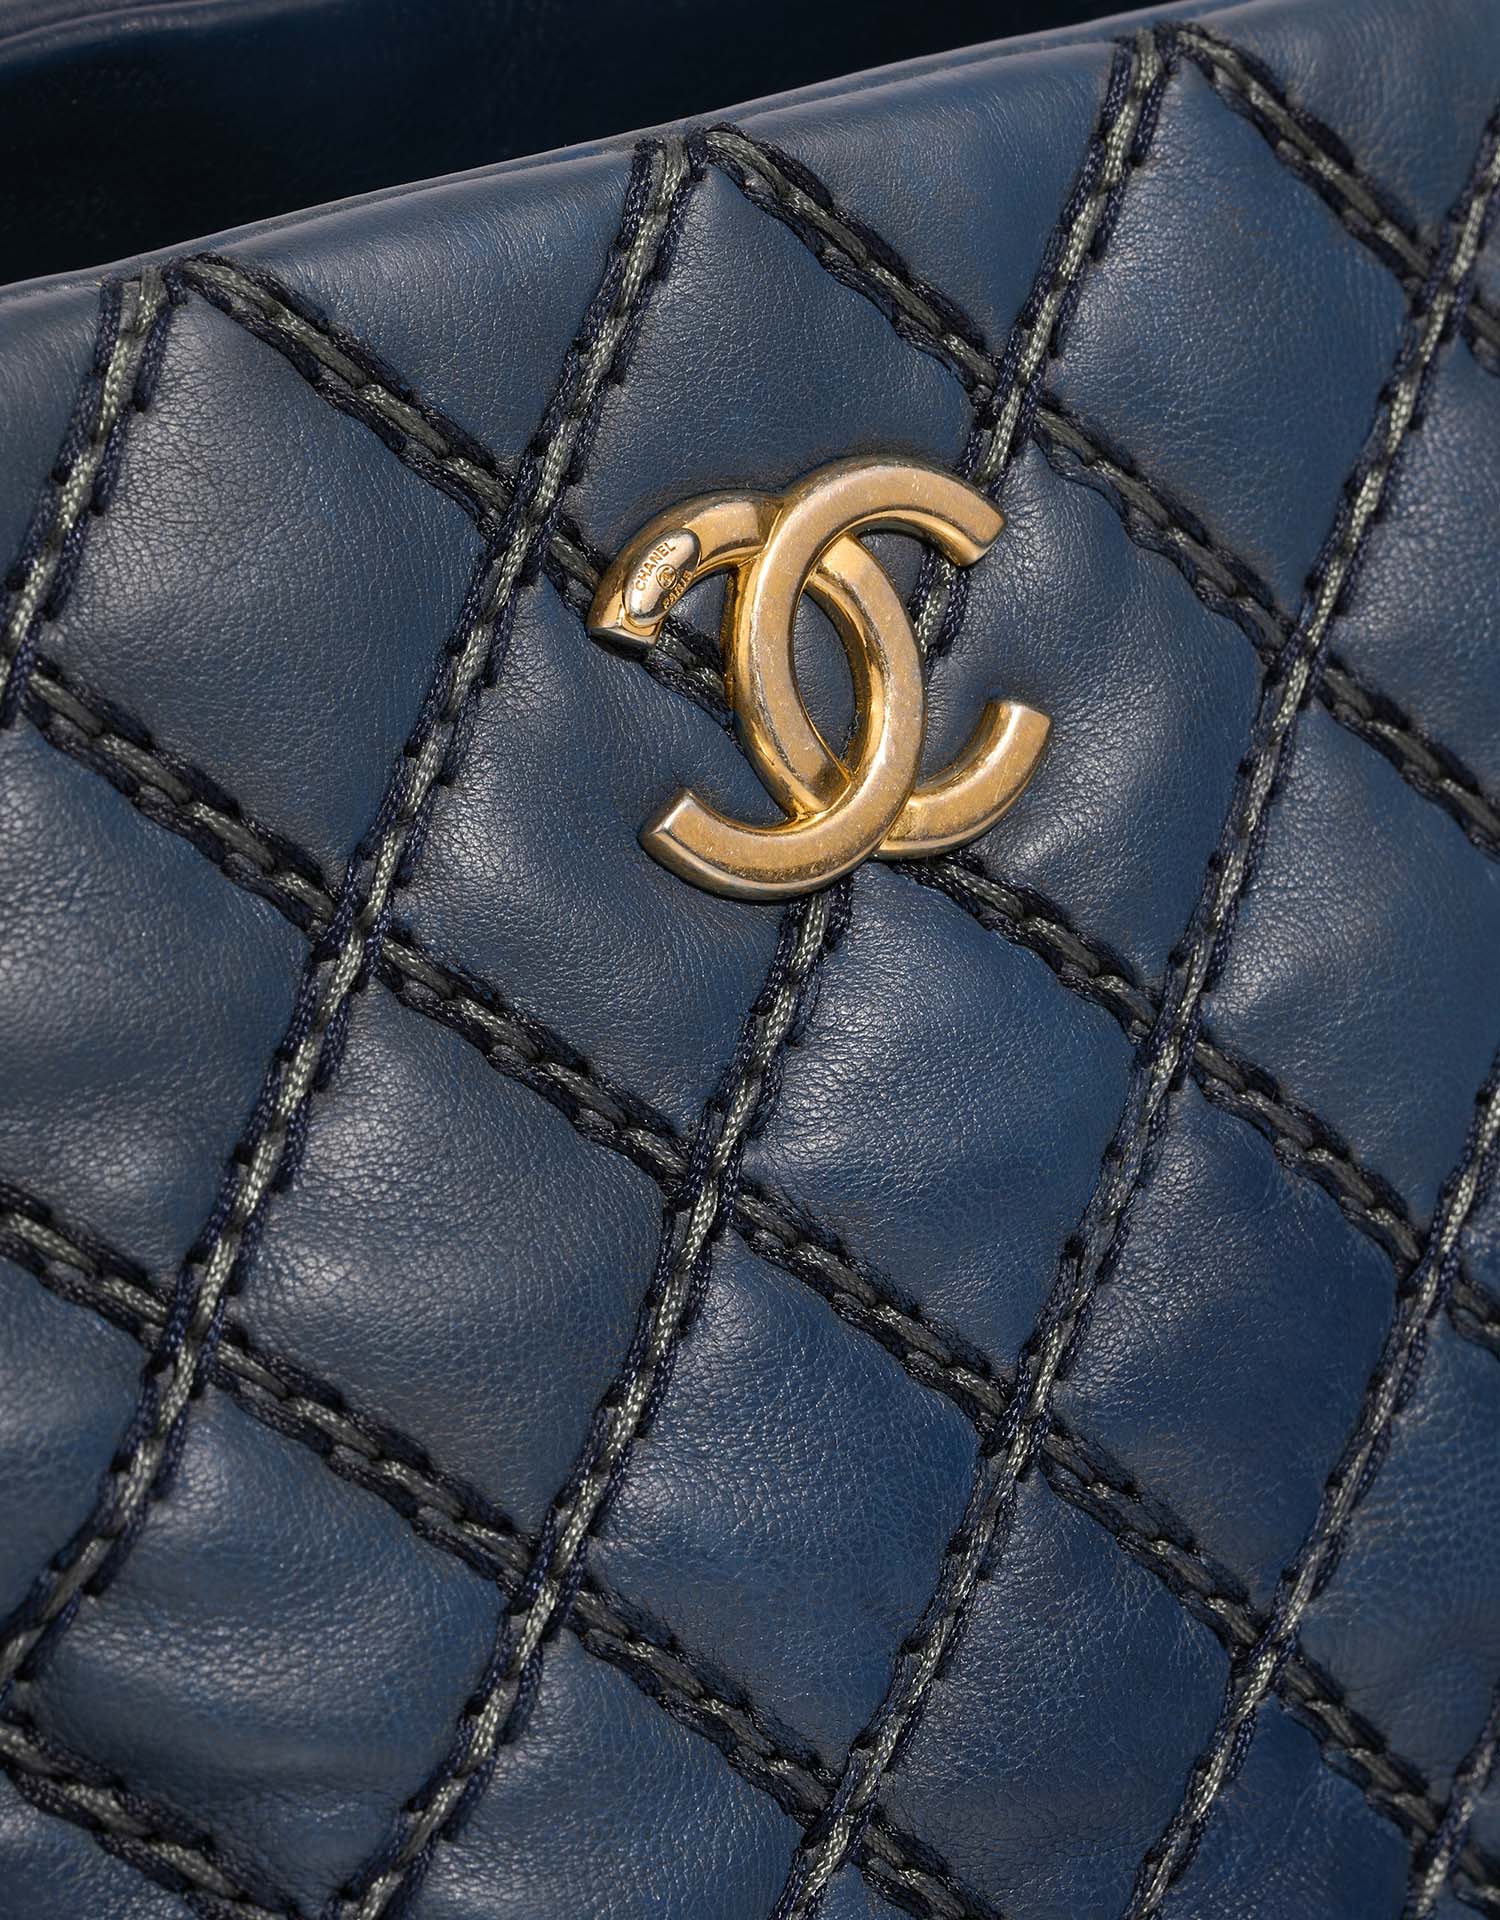 Chanel Shopping Tote Navy Closing System  | Sell your designer bag on Saclab.com